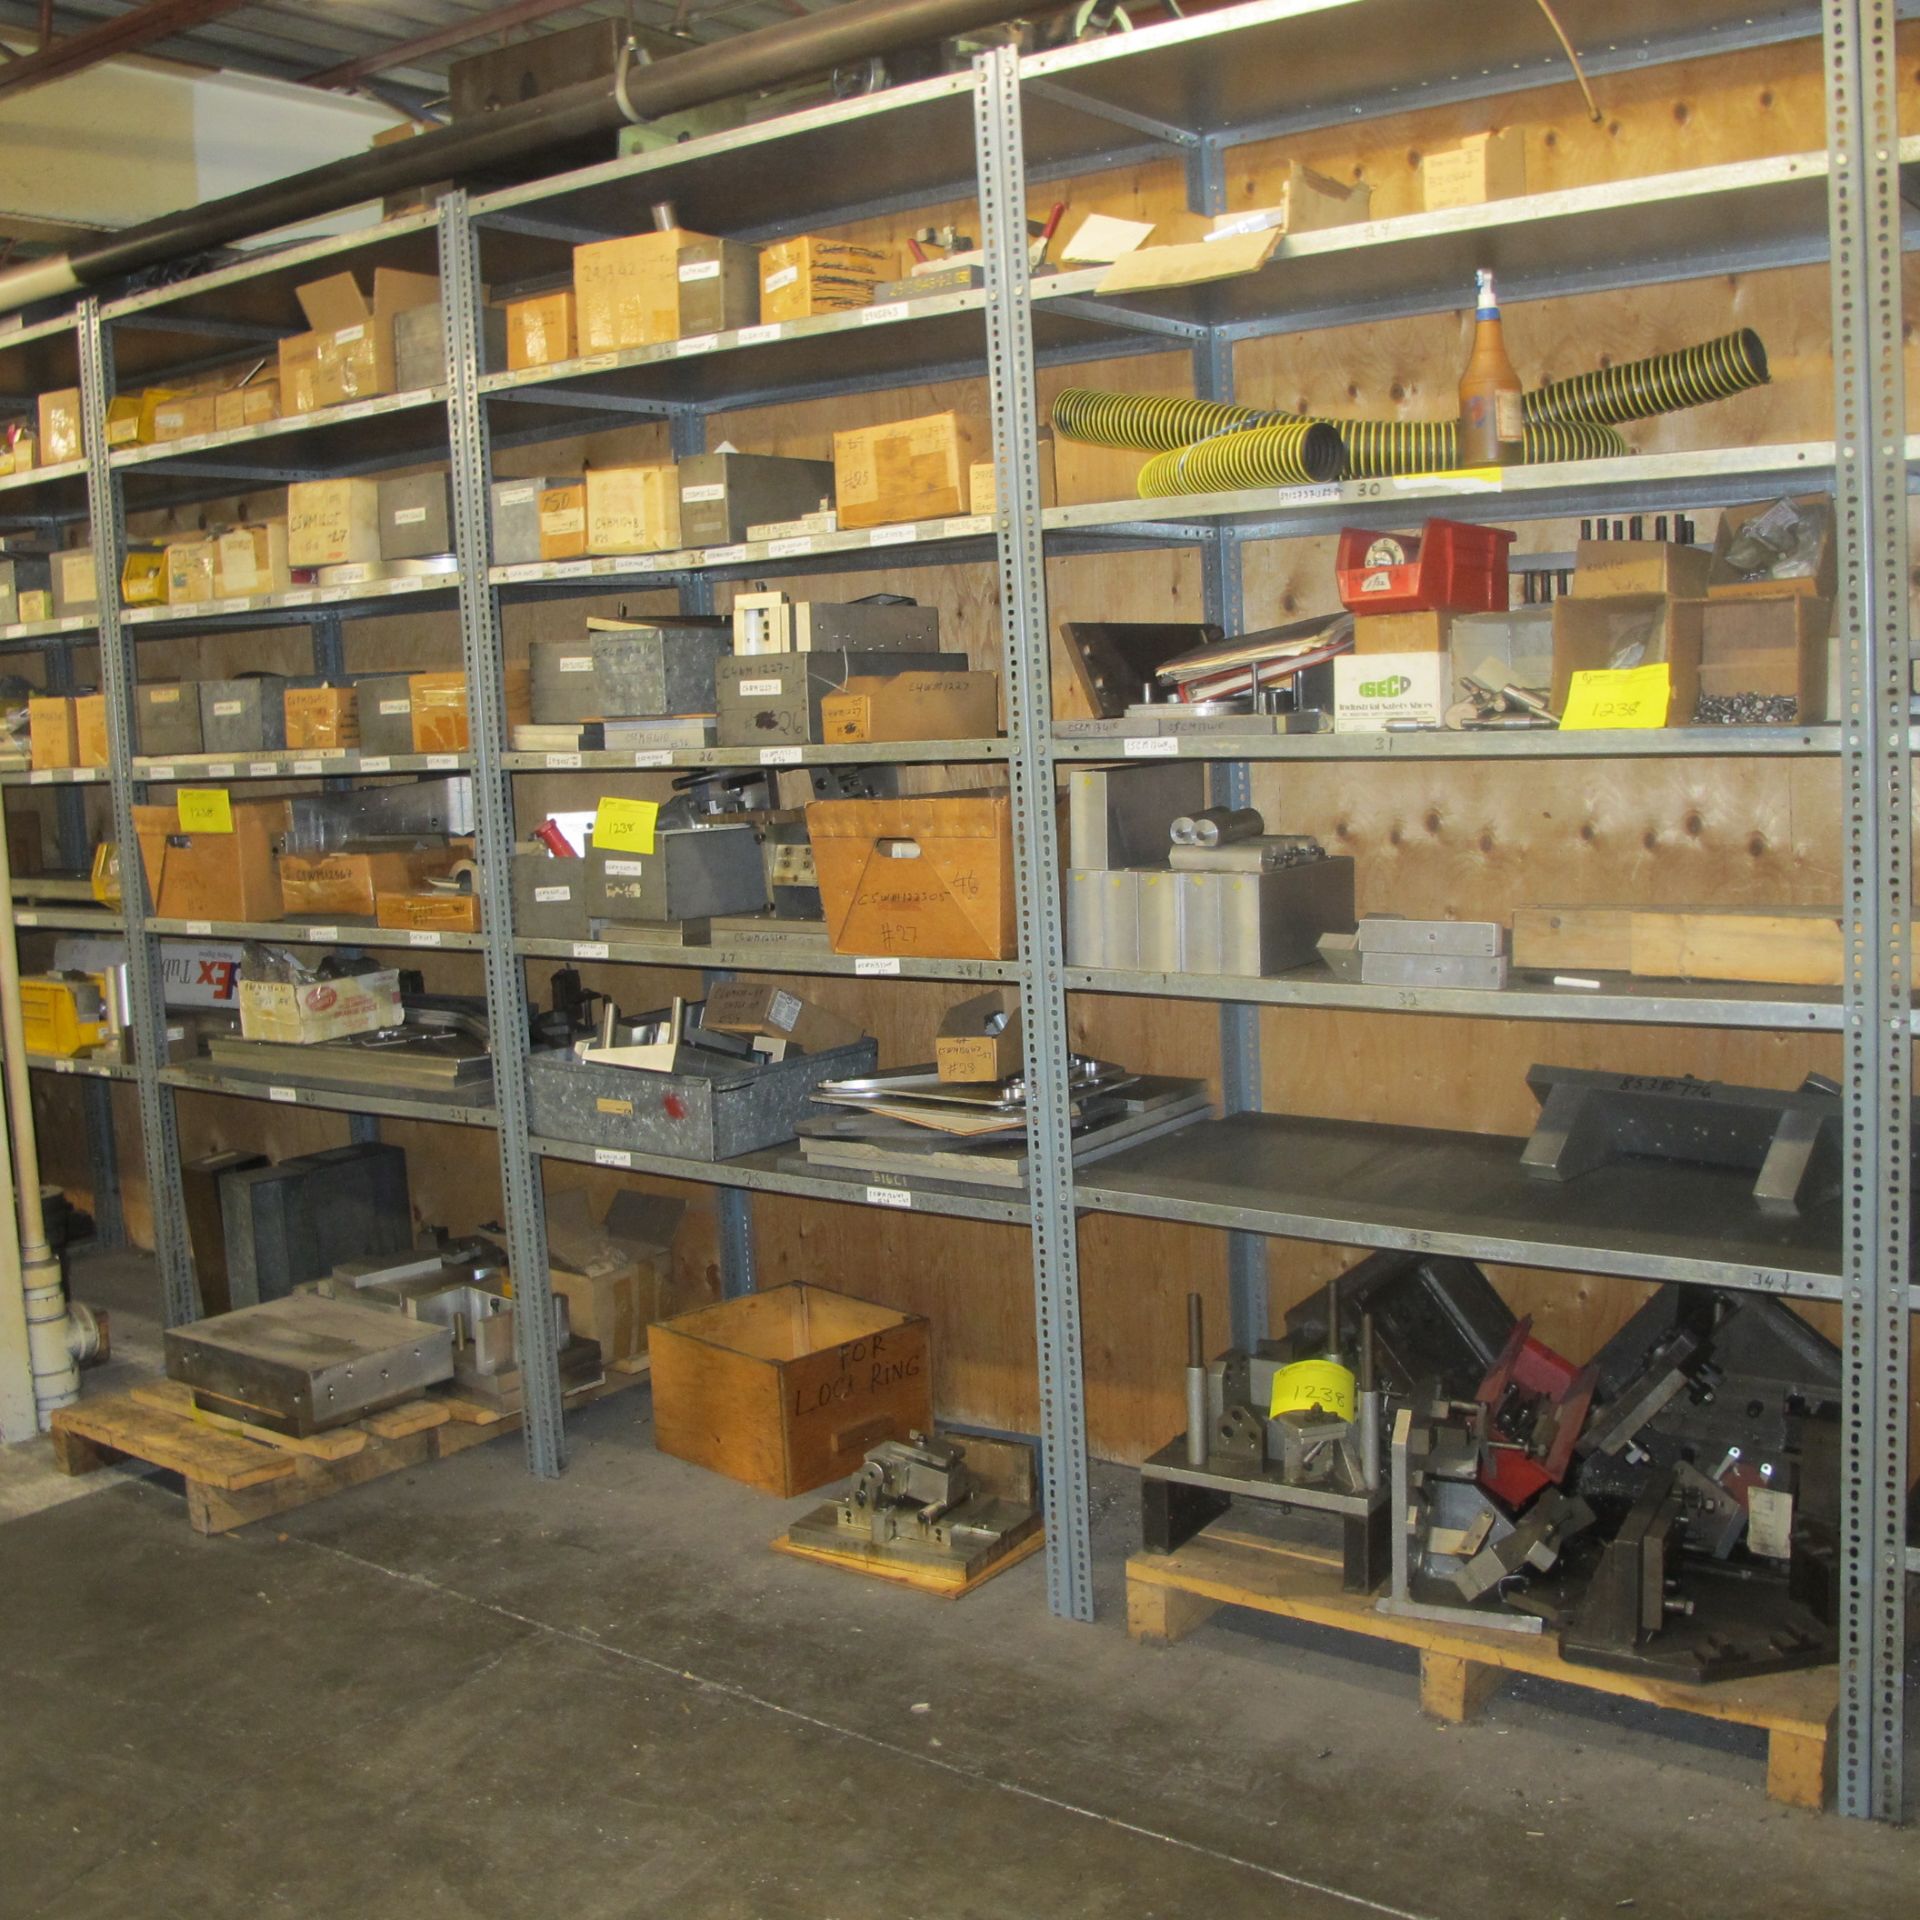 METAL PARTS AND FIXTURES ON (7) SECTION, 7-LEVEL RACK INCLUDING (3) PALLETS IN FRONT OF RACKING (